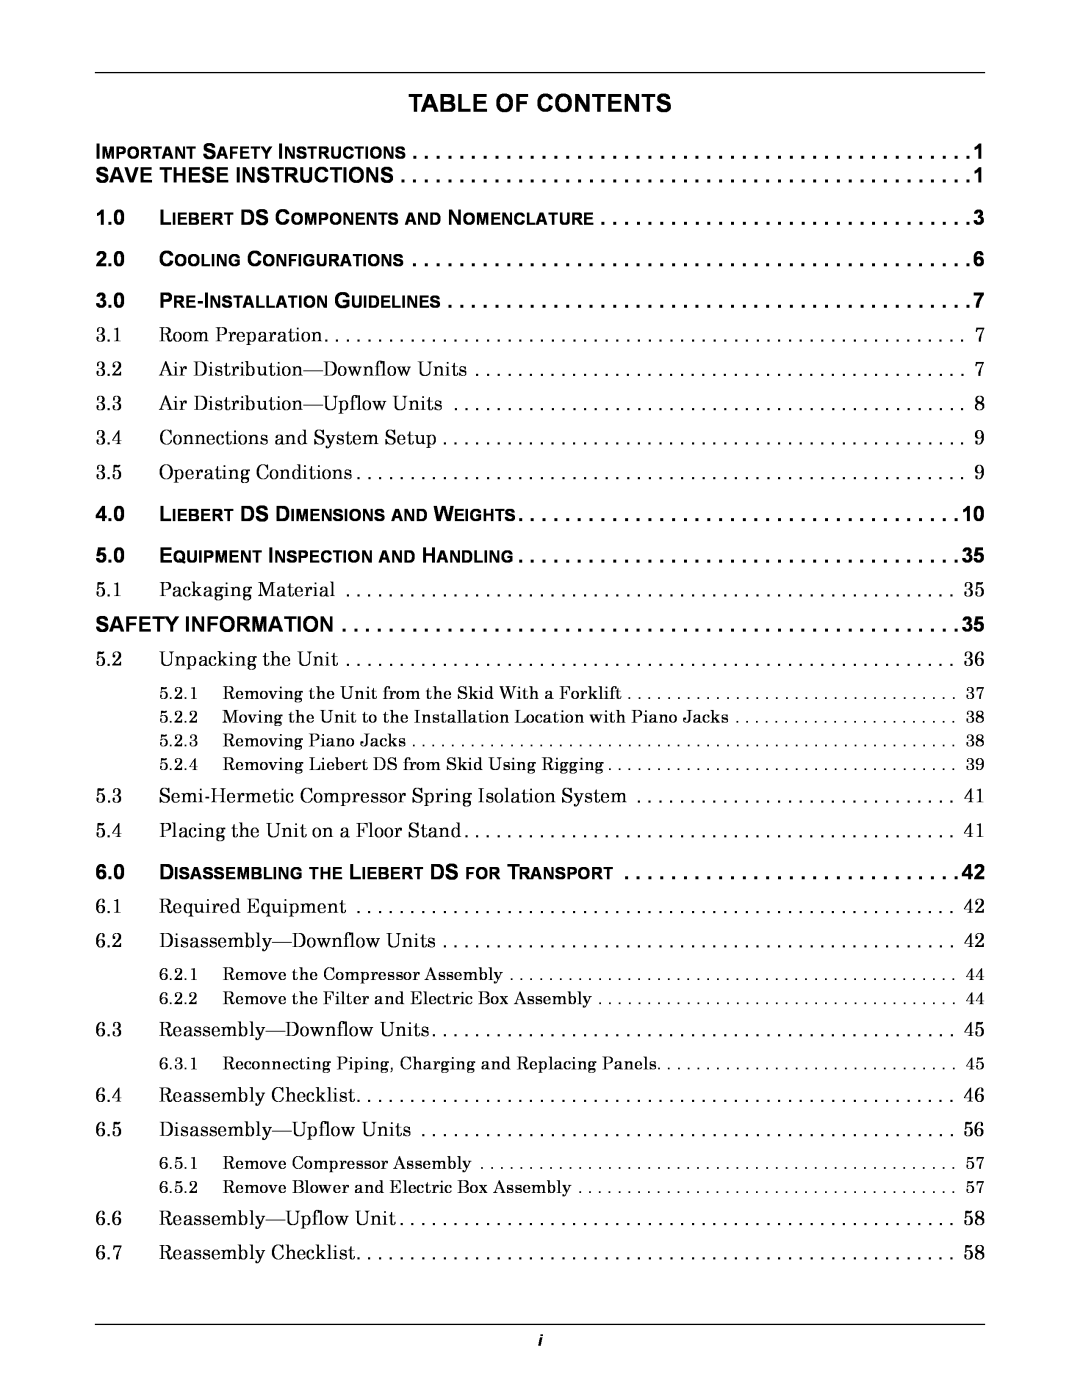 Liebert Table Of Contents, LIEBERT DS COMPONENTS AND NOMENCLATURE 2.0 COOLING CONFIGURATIONS, Safety Information 